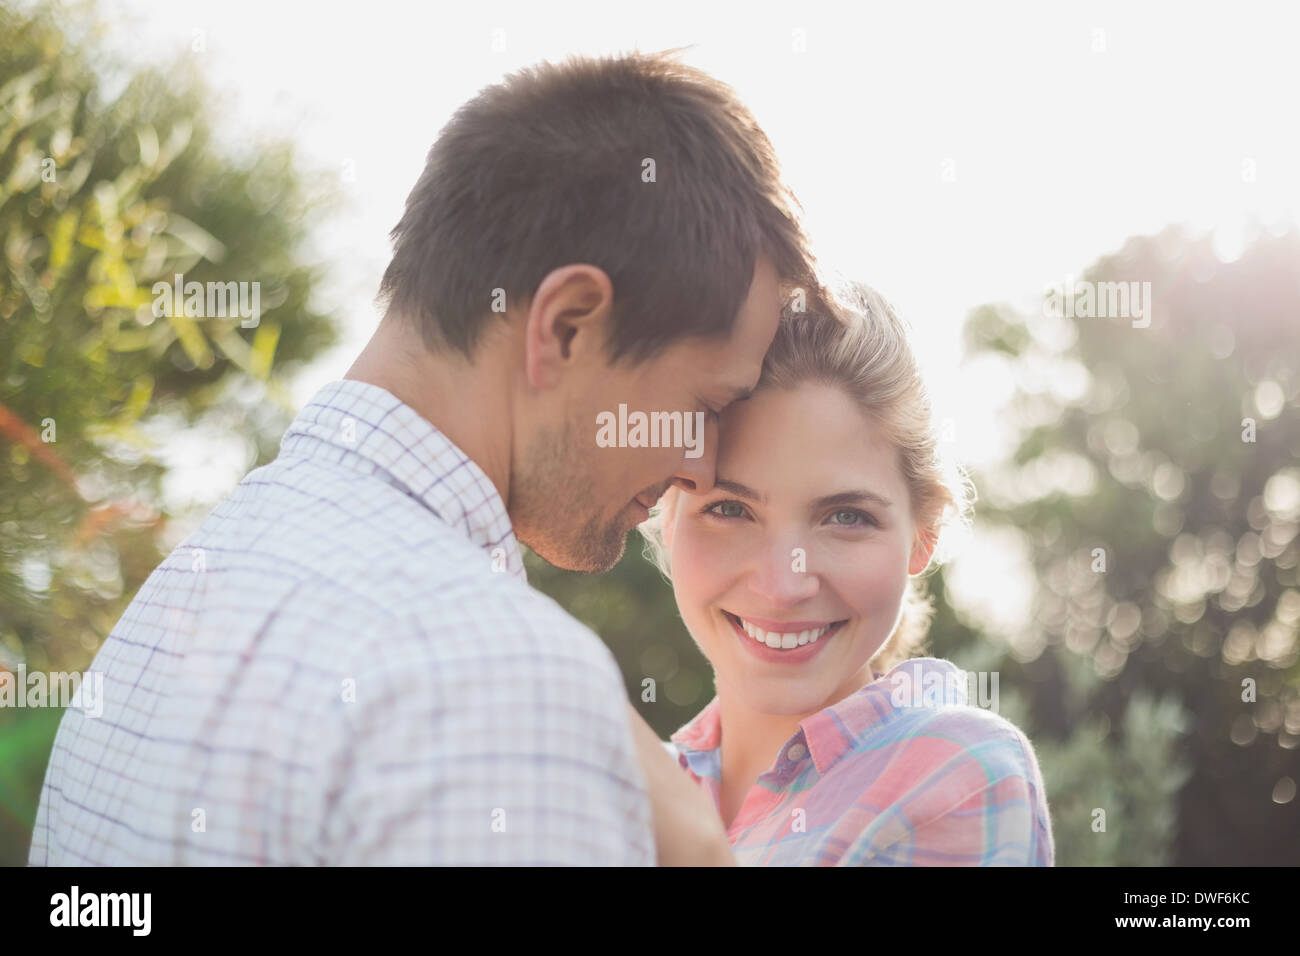 Smiling young couple in park Banque D'Images